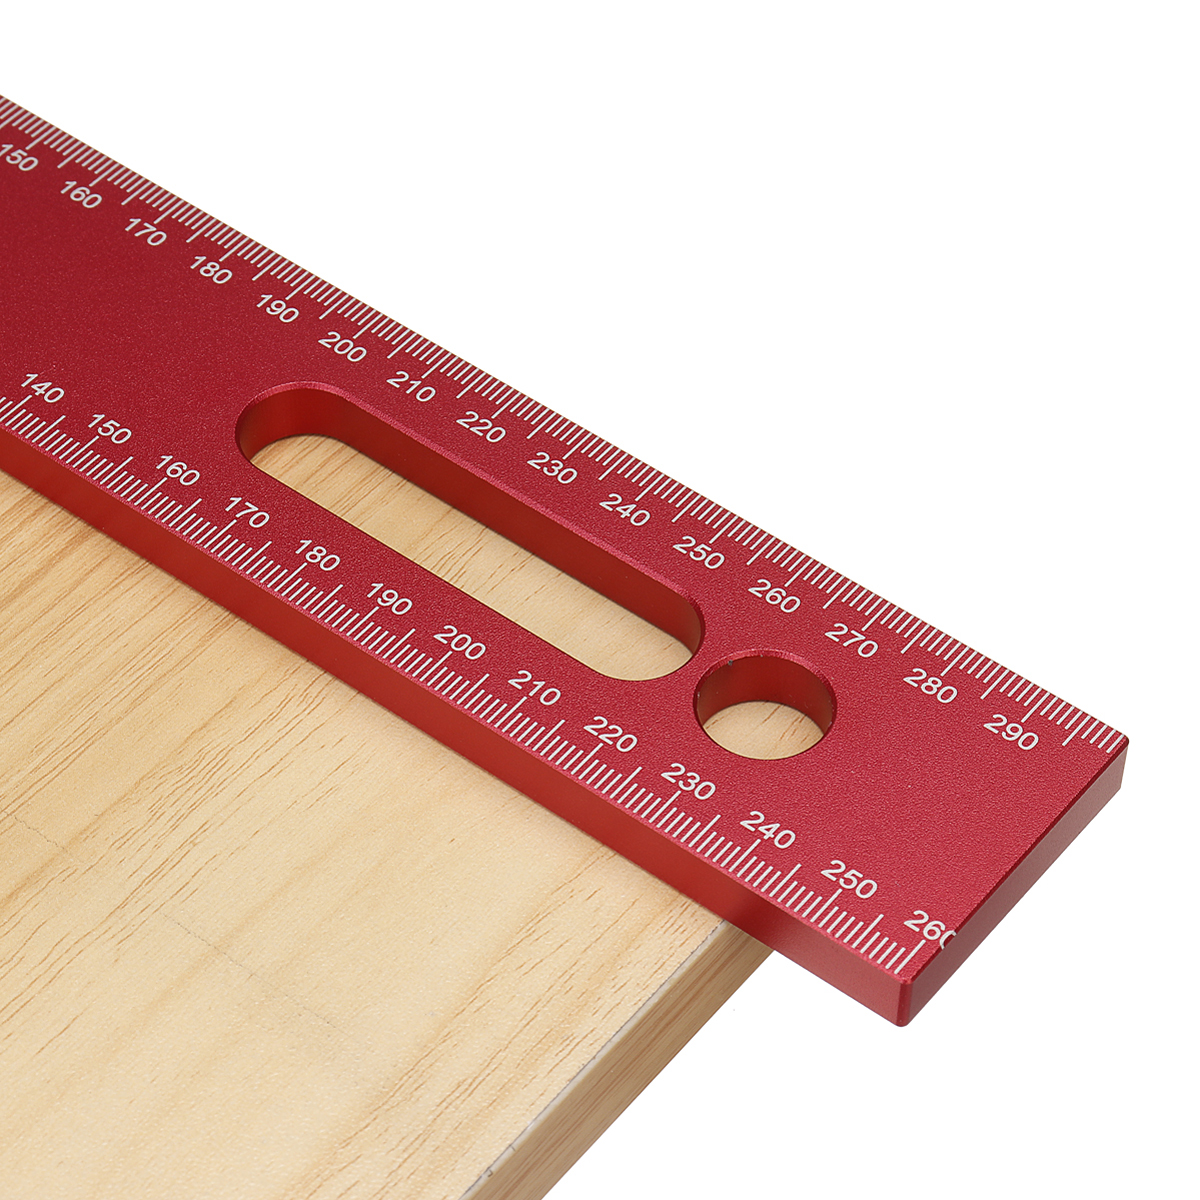 VEIKO-300x200mm-Aluminum-Alloy-Precision-Woodworking-Square-Right-Angle-Ruler-with-Base-1910992-9